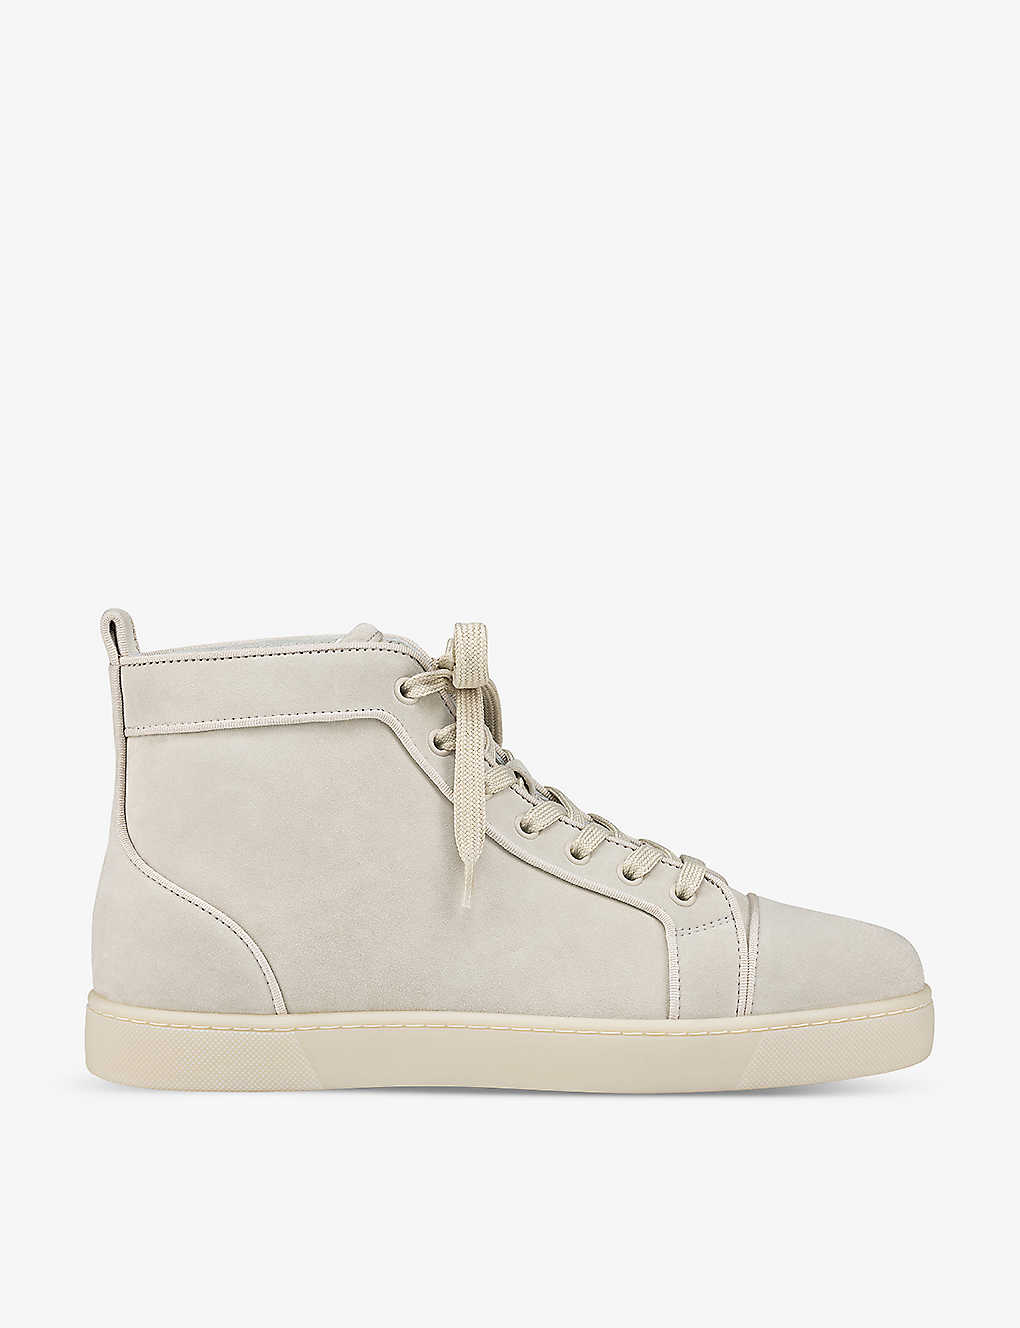 Christian Louboutin Louis Orlato Suede High-top Sneakers In Cream